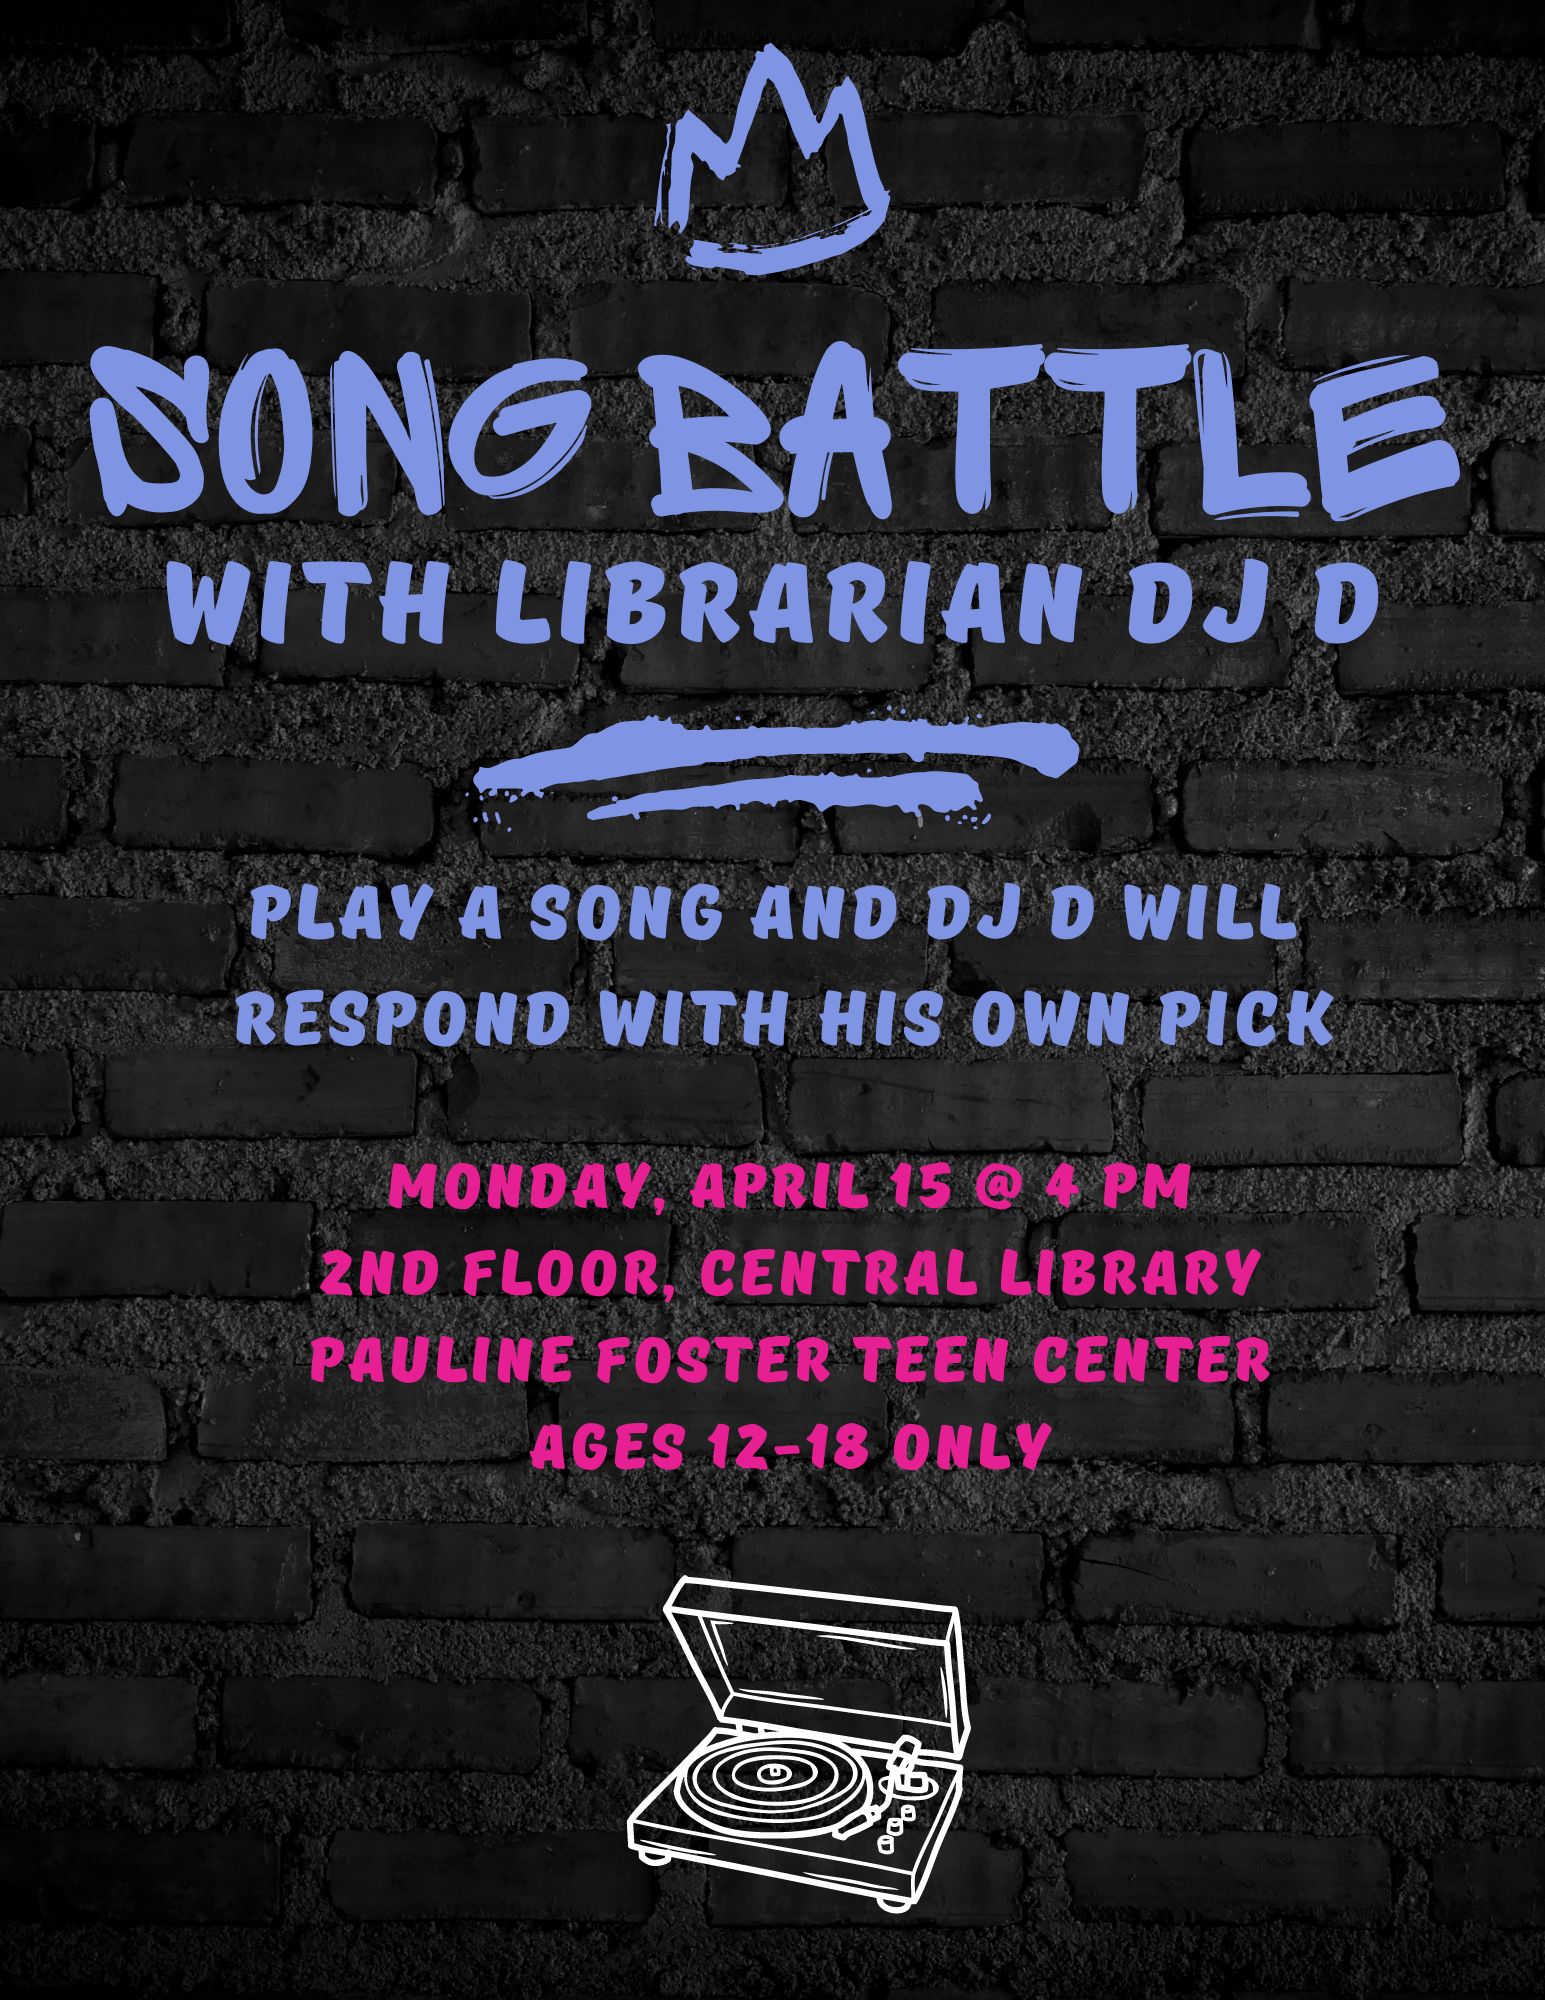 Song Battle with Librarian DJ D. play a song and dj d will respond with his own pick. monday, april 15 @ 4 pm 2nd floor, central library pauline foster teen center ages 12-18 only